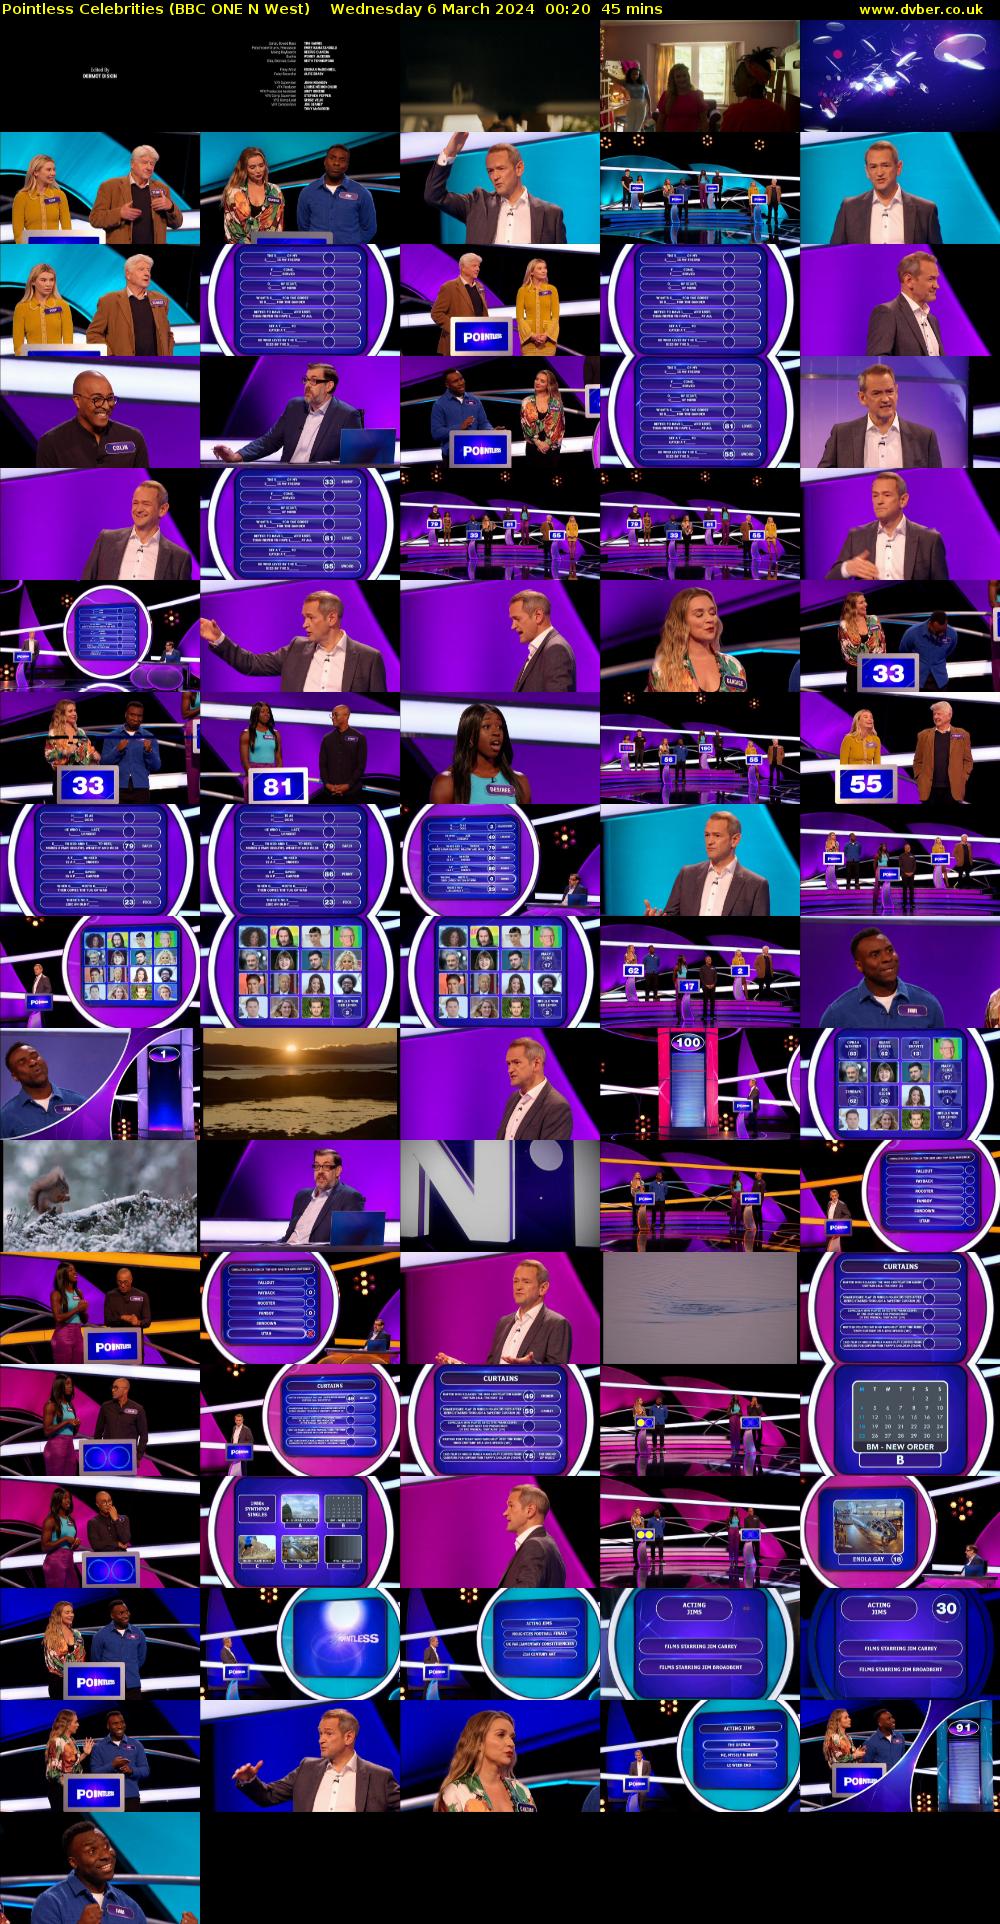 Pointless Celebrities (BBC ONE N West) Wednesday 6 March 2024 00:20 - 01:05